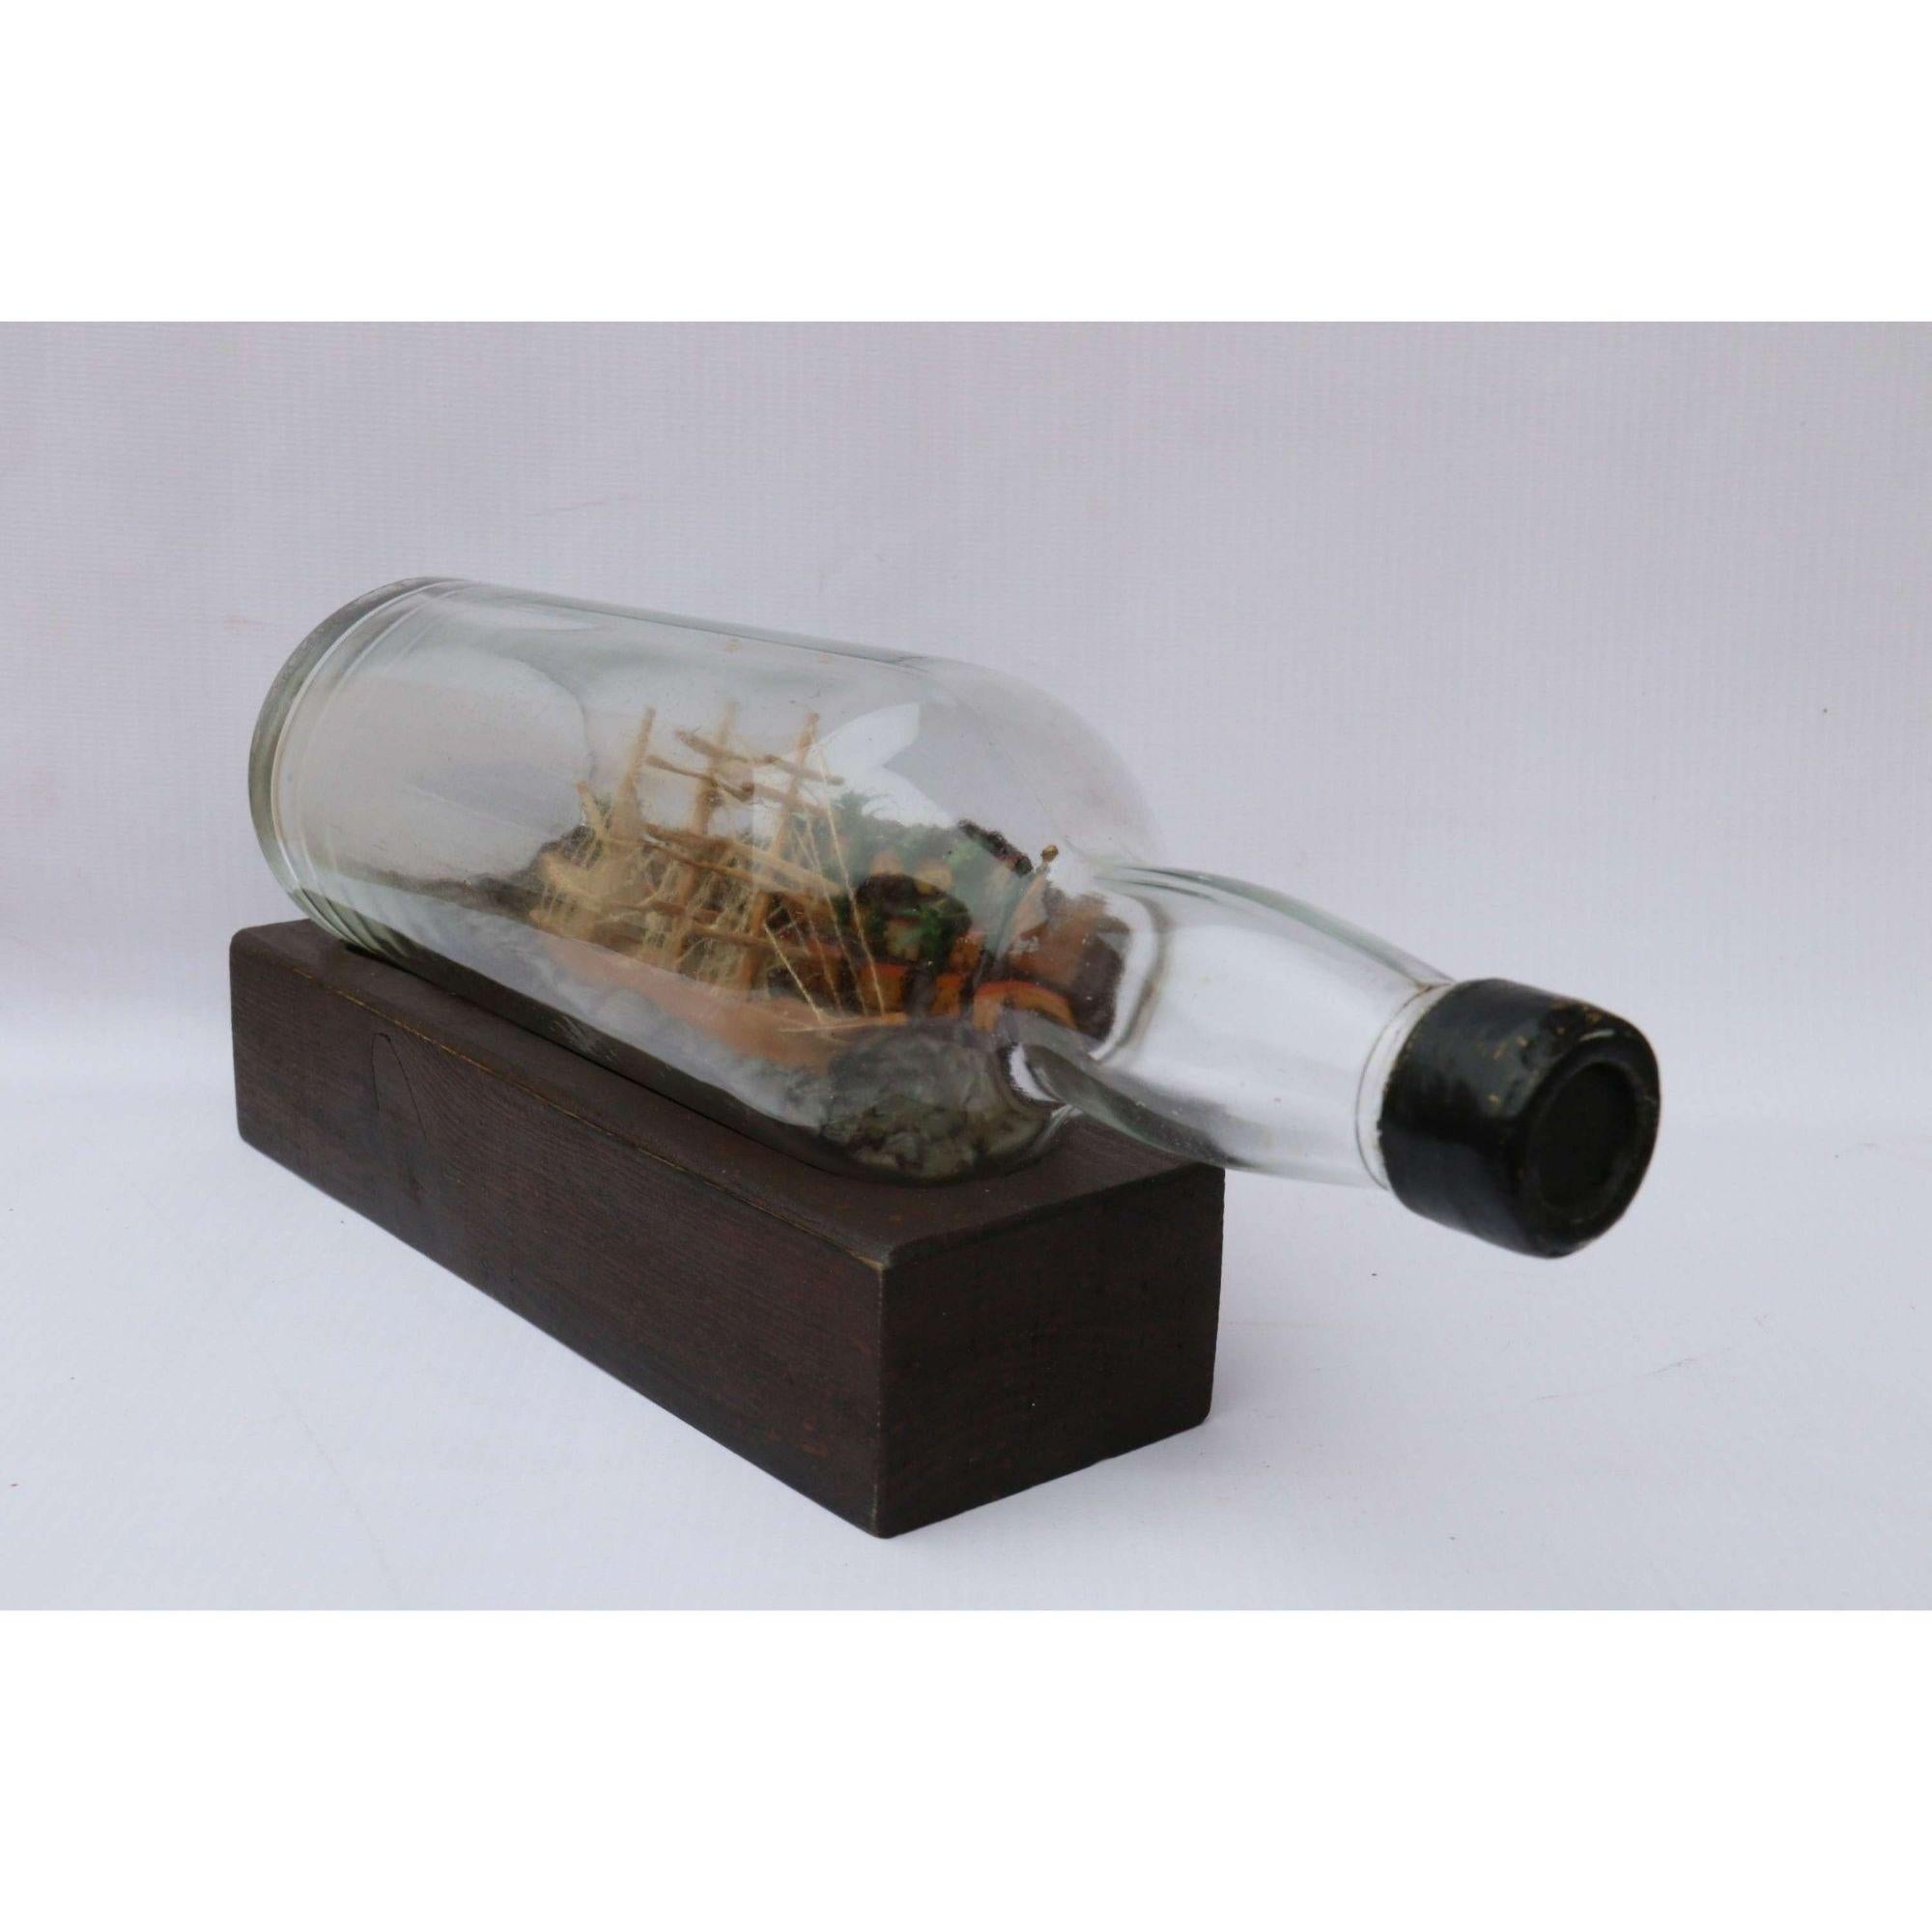 English Early 20th Century Model Ship Diorama Within a Bottle, circa 1920 For Sale